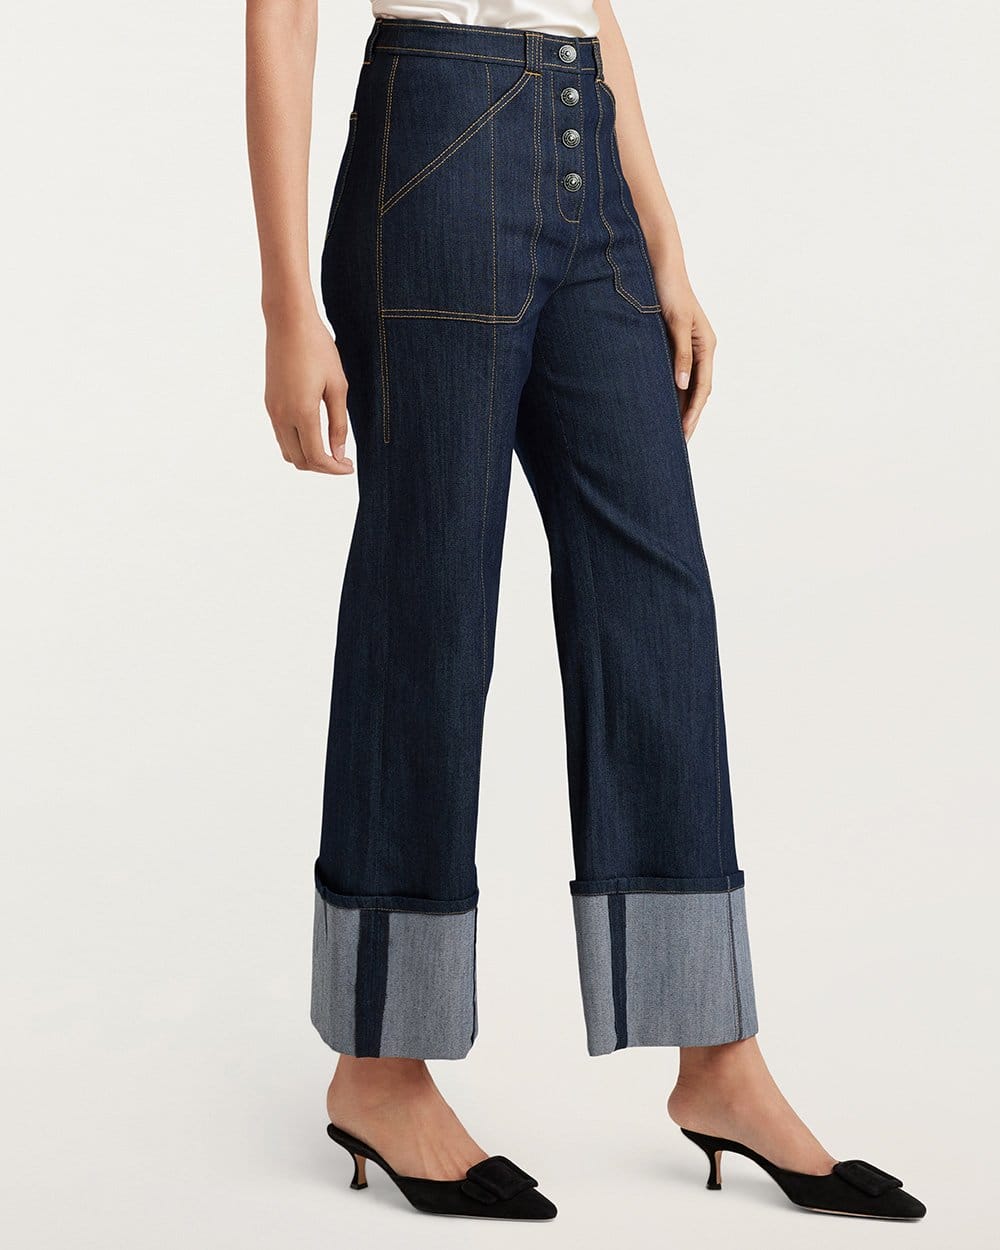 https://cinqasept.nyc/collections/le-denim